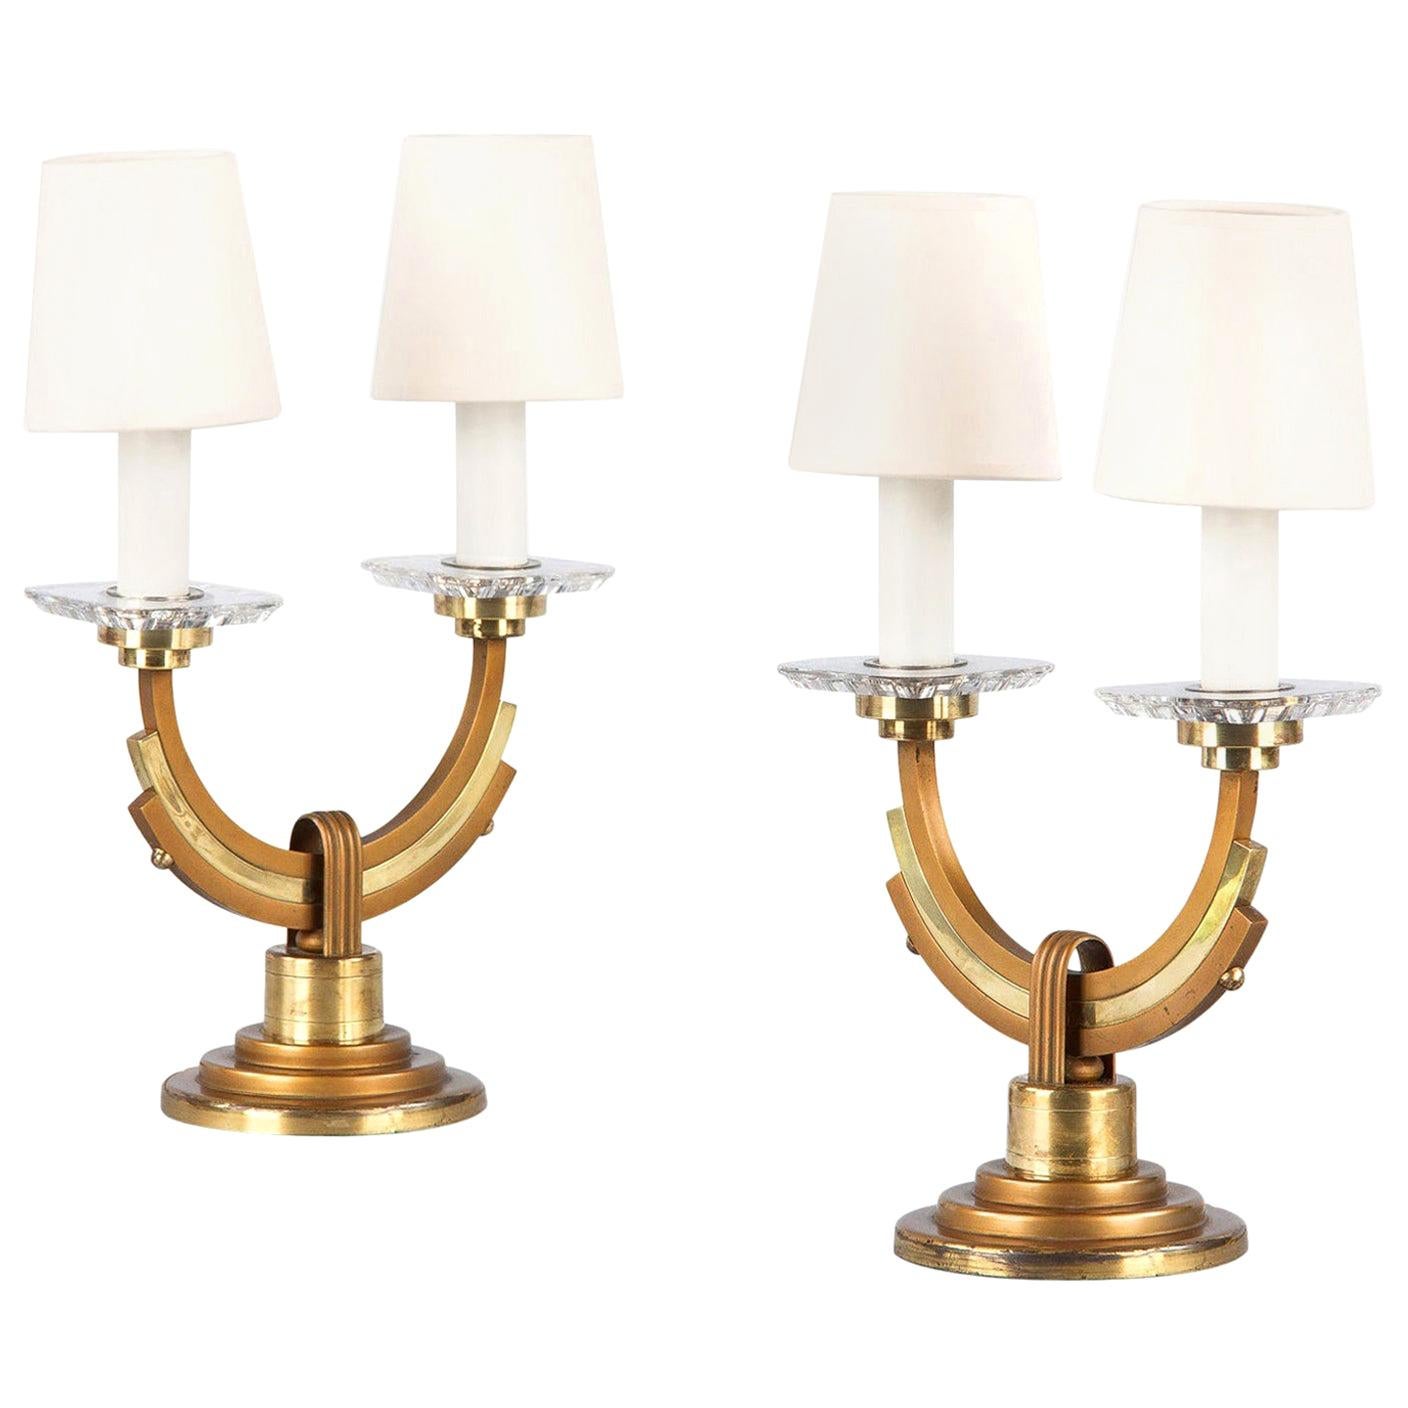 Pair of French Art Deco Brass and Copper Lamps, 1930s